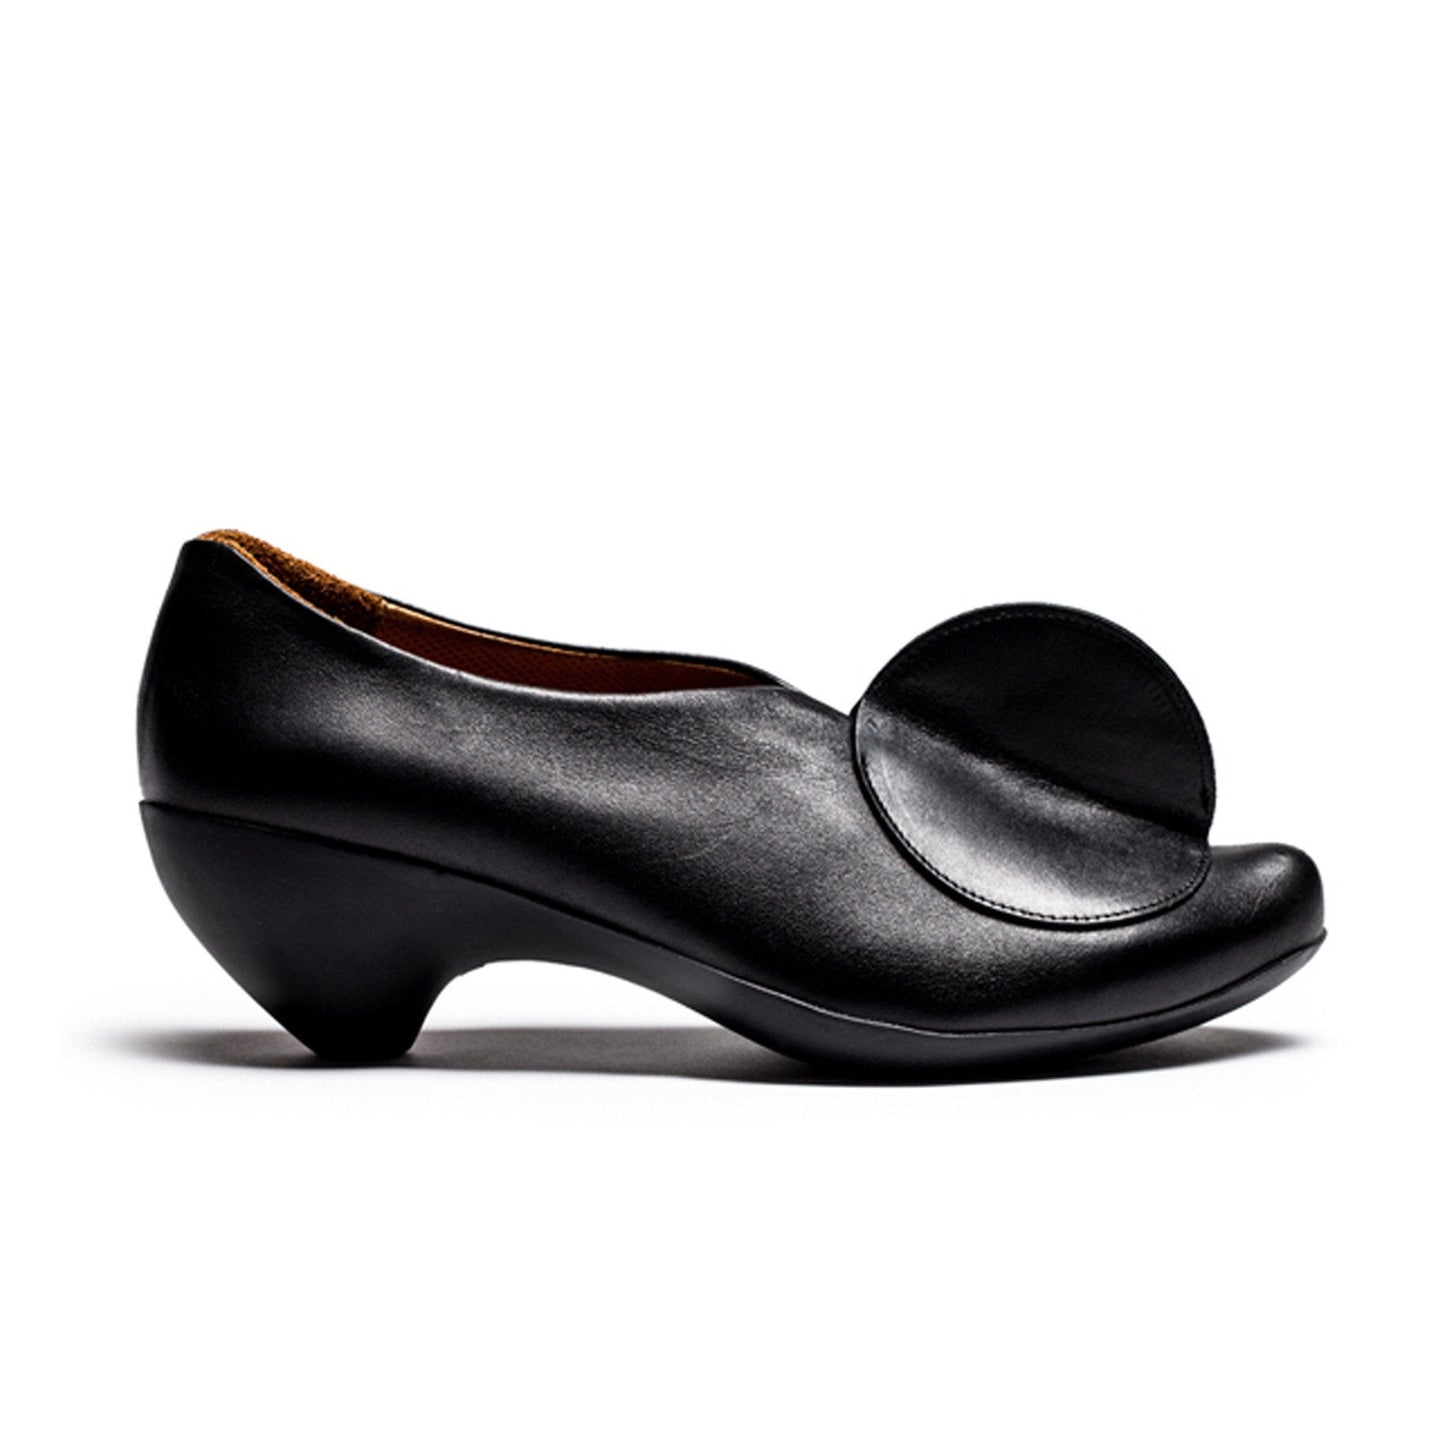 LOWTOP Black Women's Slip On Calf Mid-Heel by Tracey Neuls